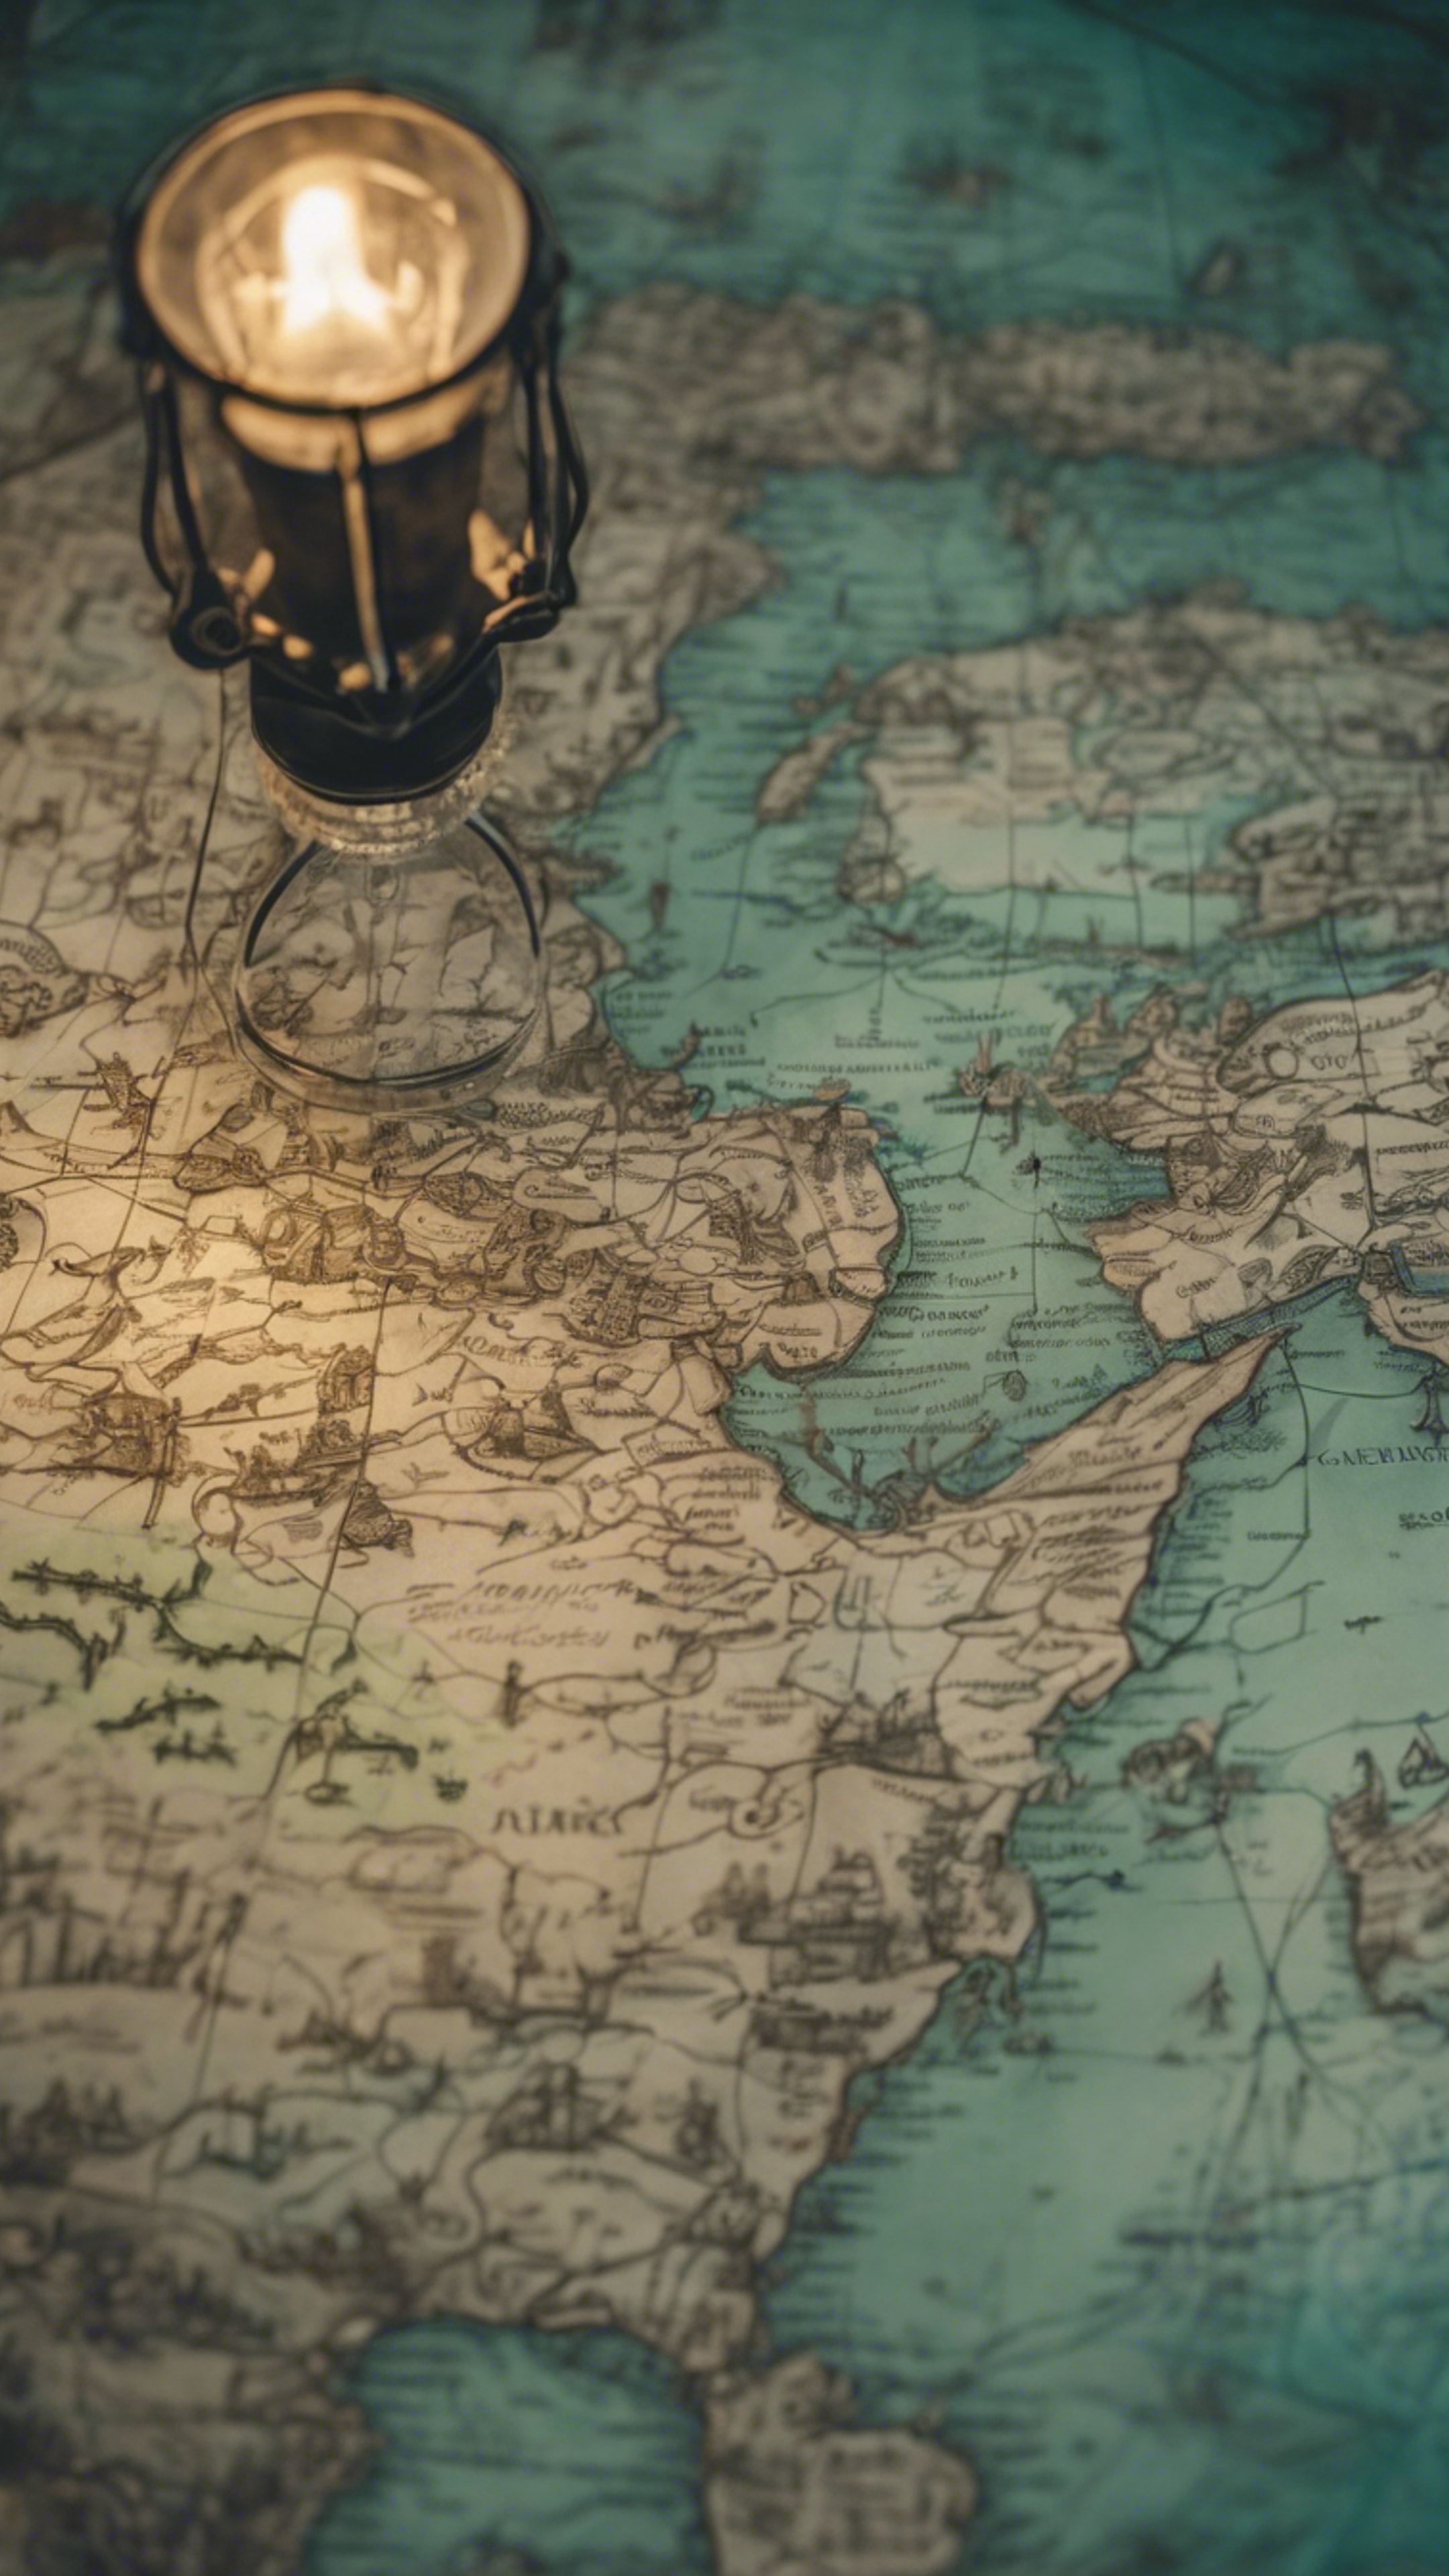 A close-up view of an ancient Gothic map bathed in the soft glow of a teal lamps. Wallpaper[627b88ed67974d3896ee]